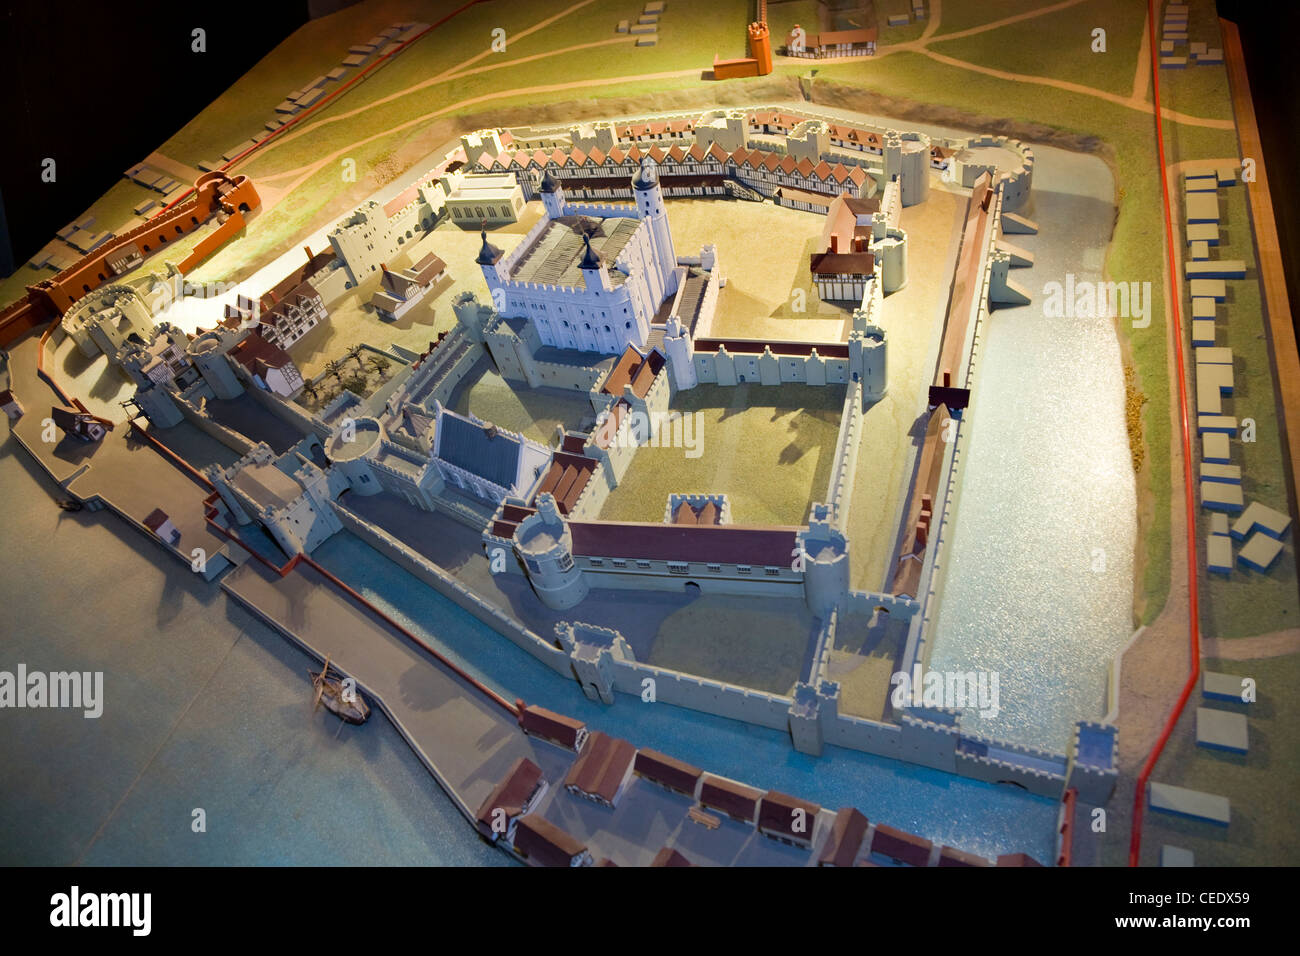 Scale model recreation display of Tower of London shown in medieval times. displayed inside the White tower. Tower of London. UK Stock Photo